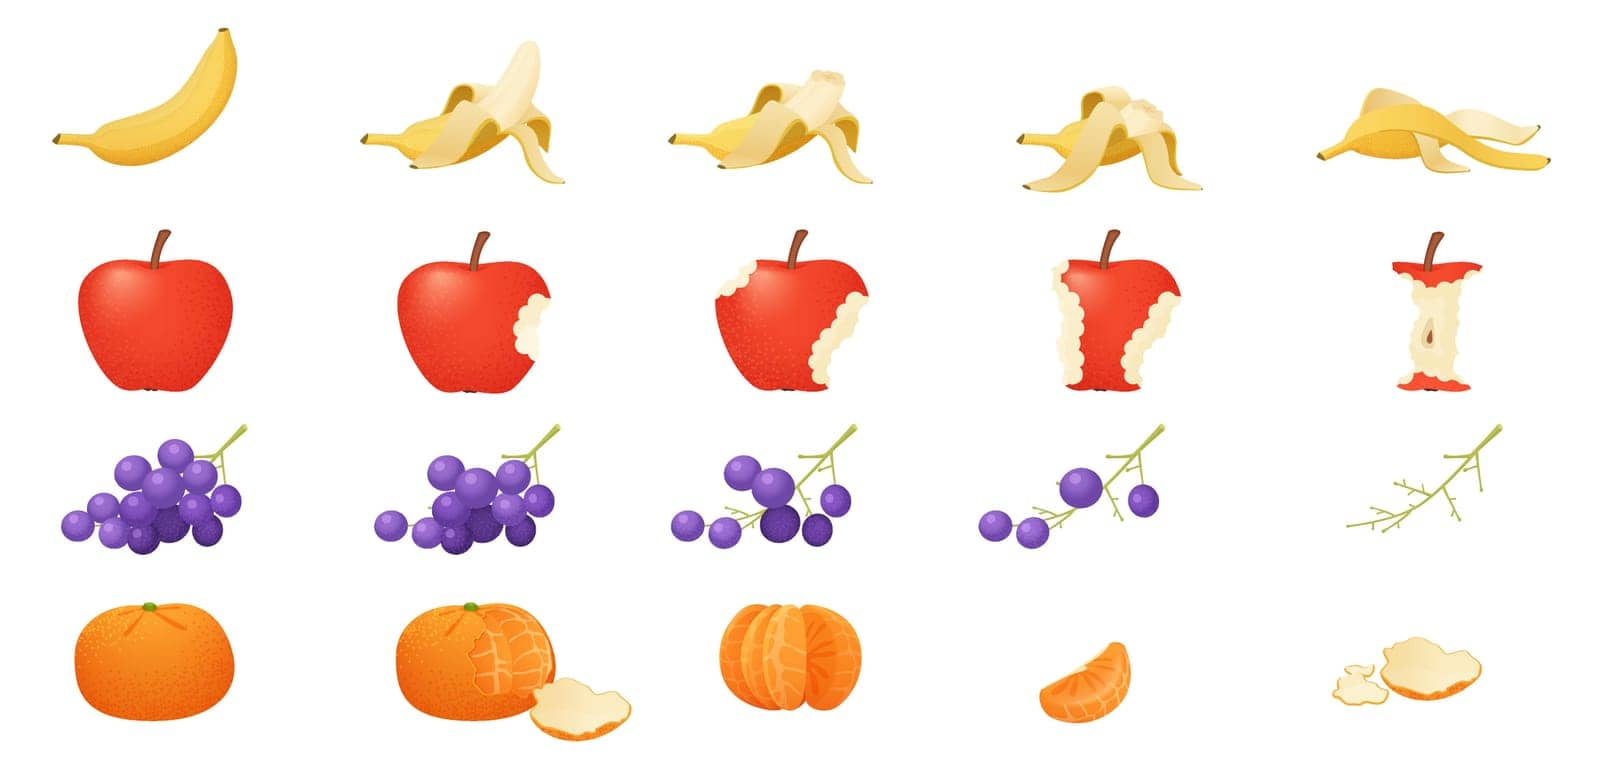 Eaten fruits set, sequence game animation of bitten food. Animated steps of eating banana with peel from whole to disappear, red apple and grapes on branch, tangerine cartoon vector illustration